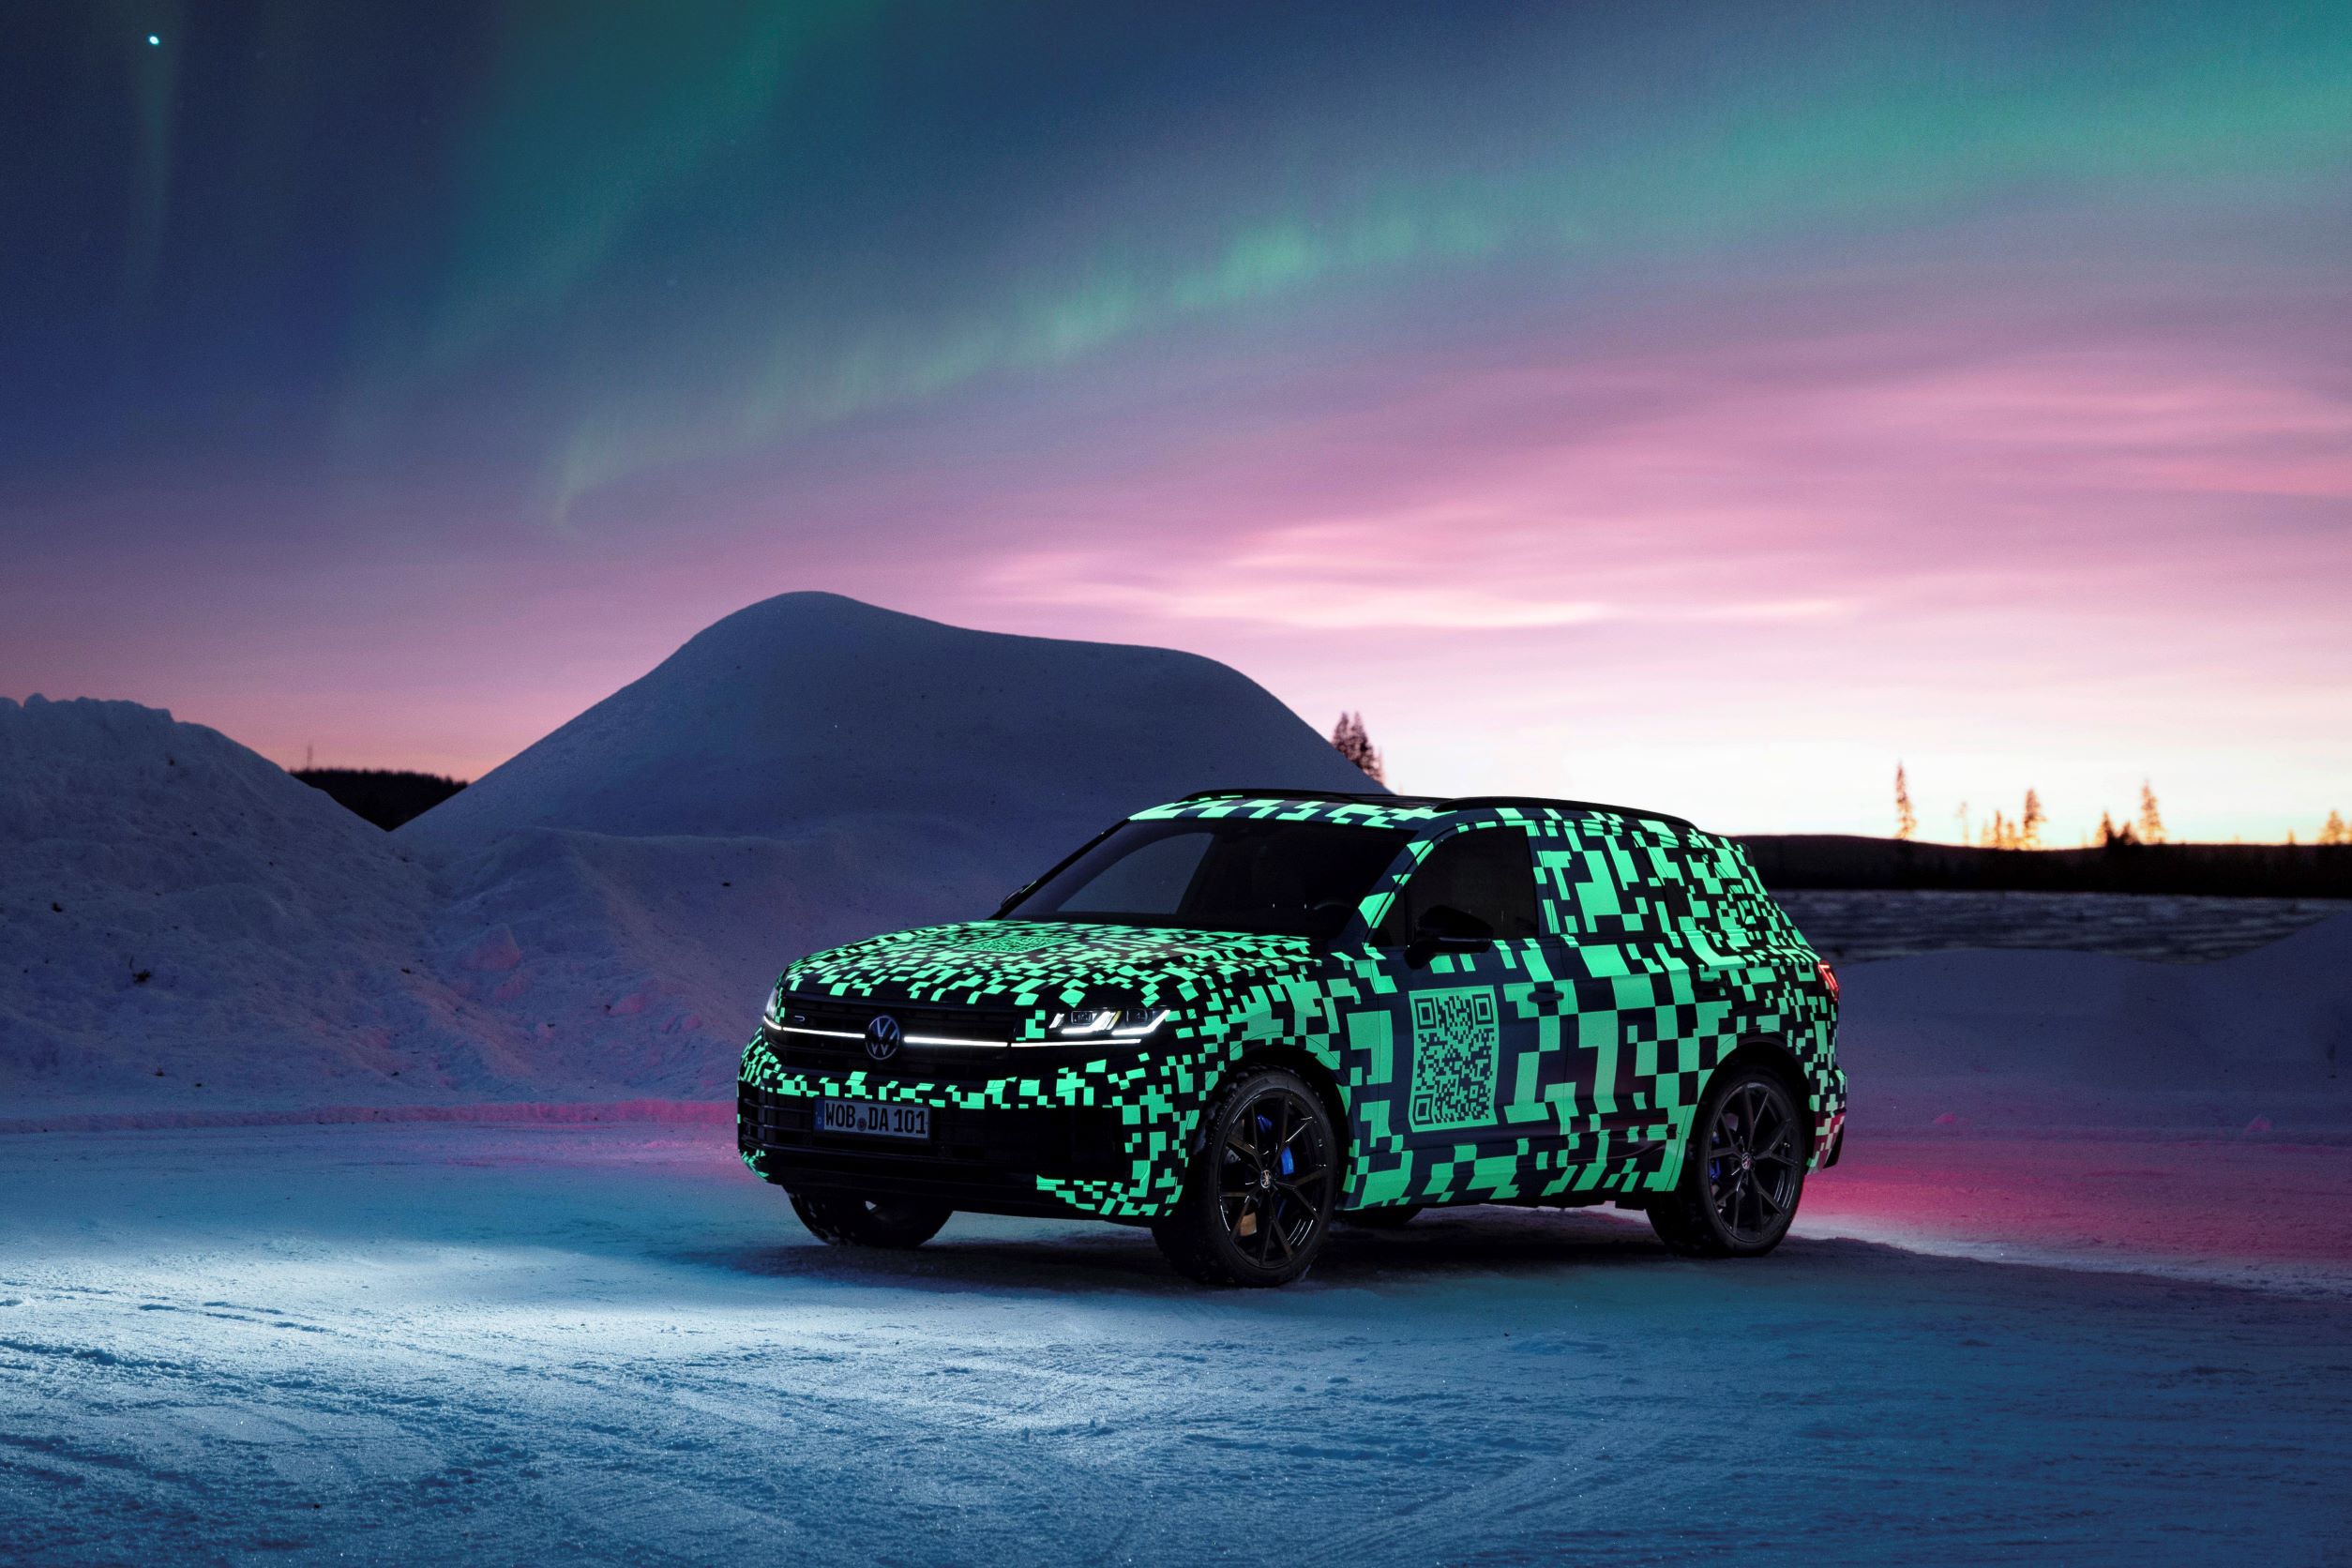 A new Volkswagen Touareg under testing, photographed under the Northern Lights